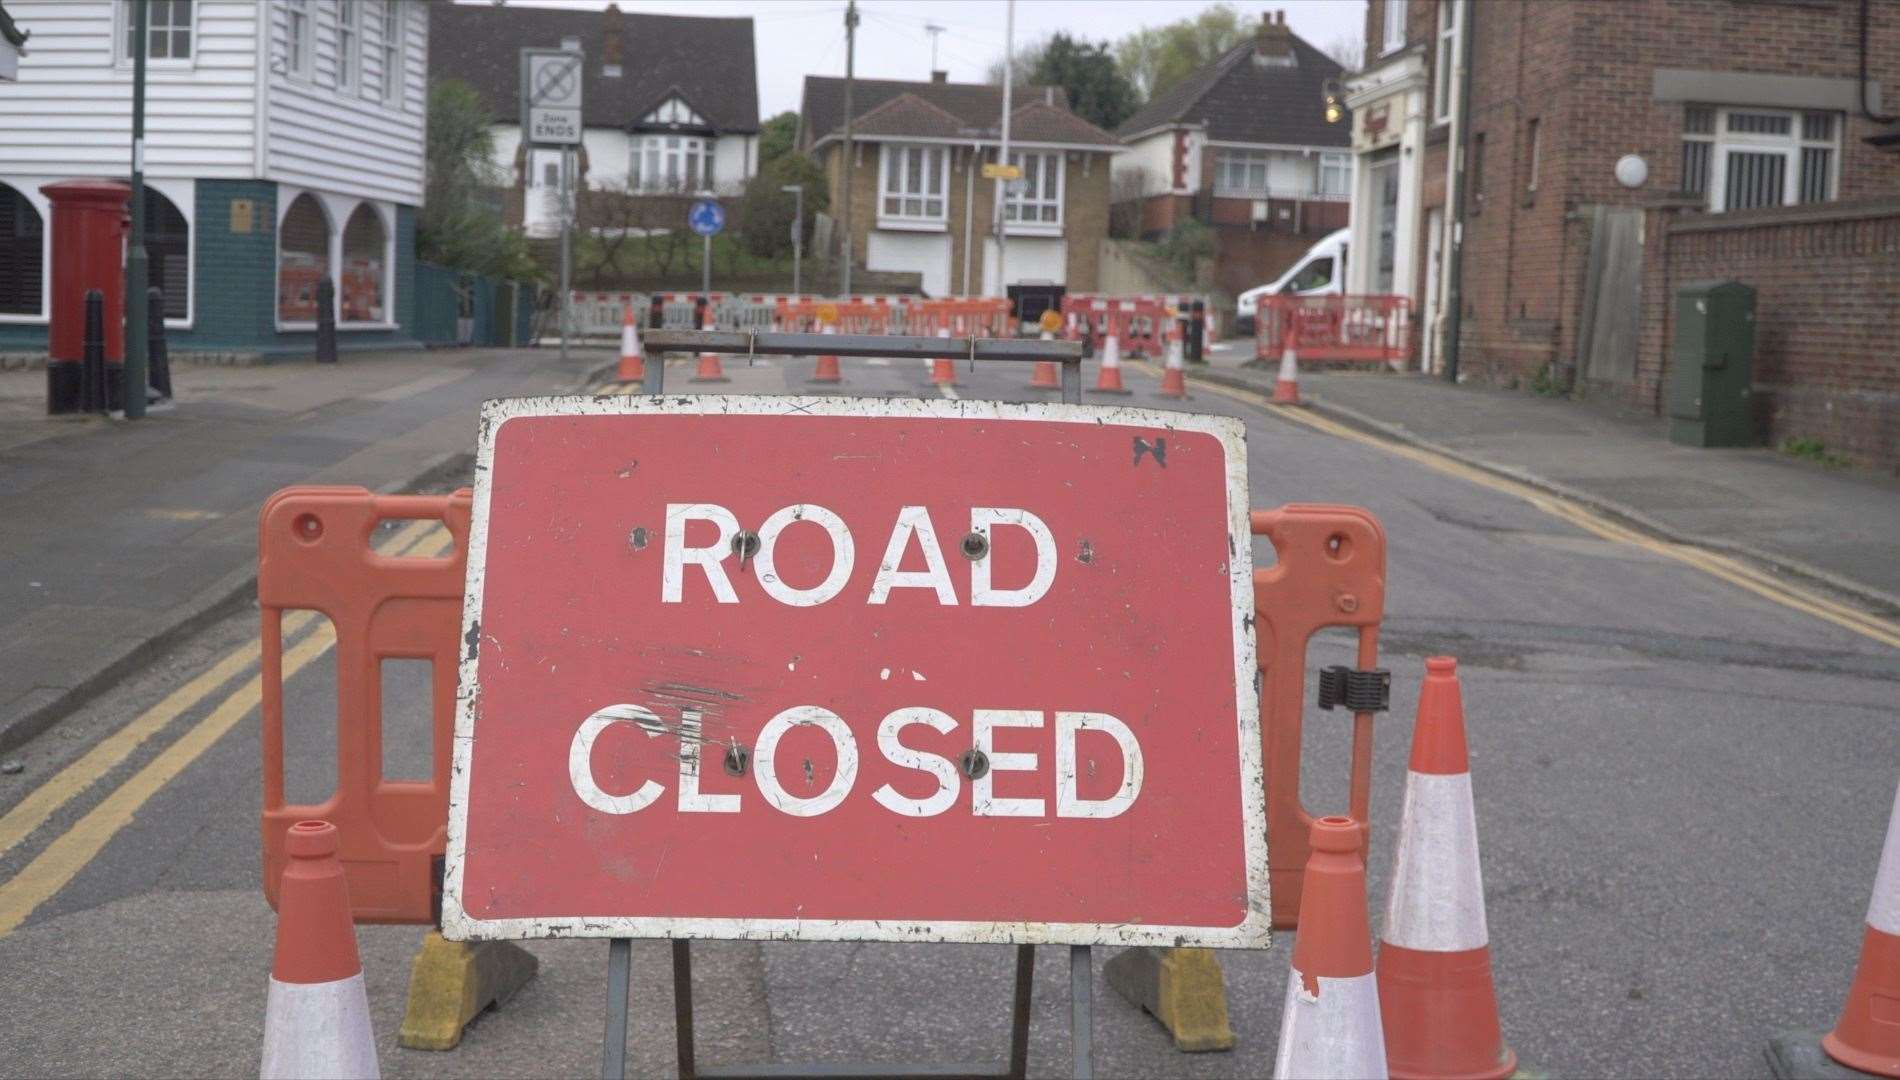 Holding Street is closed for emergency works